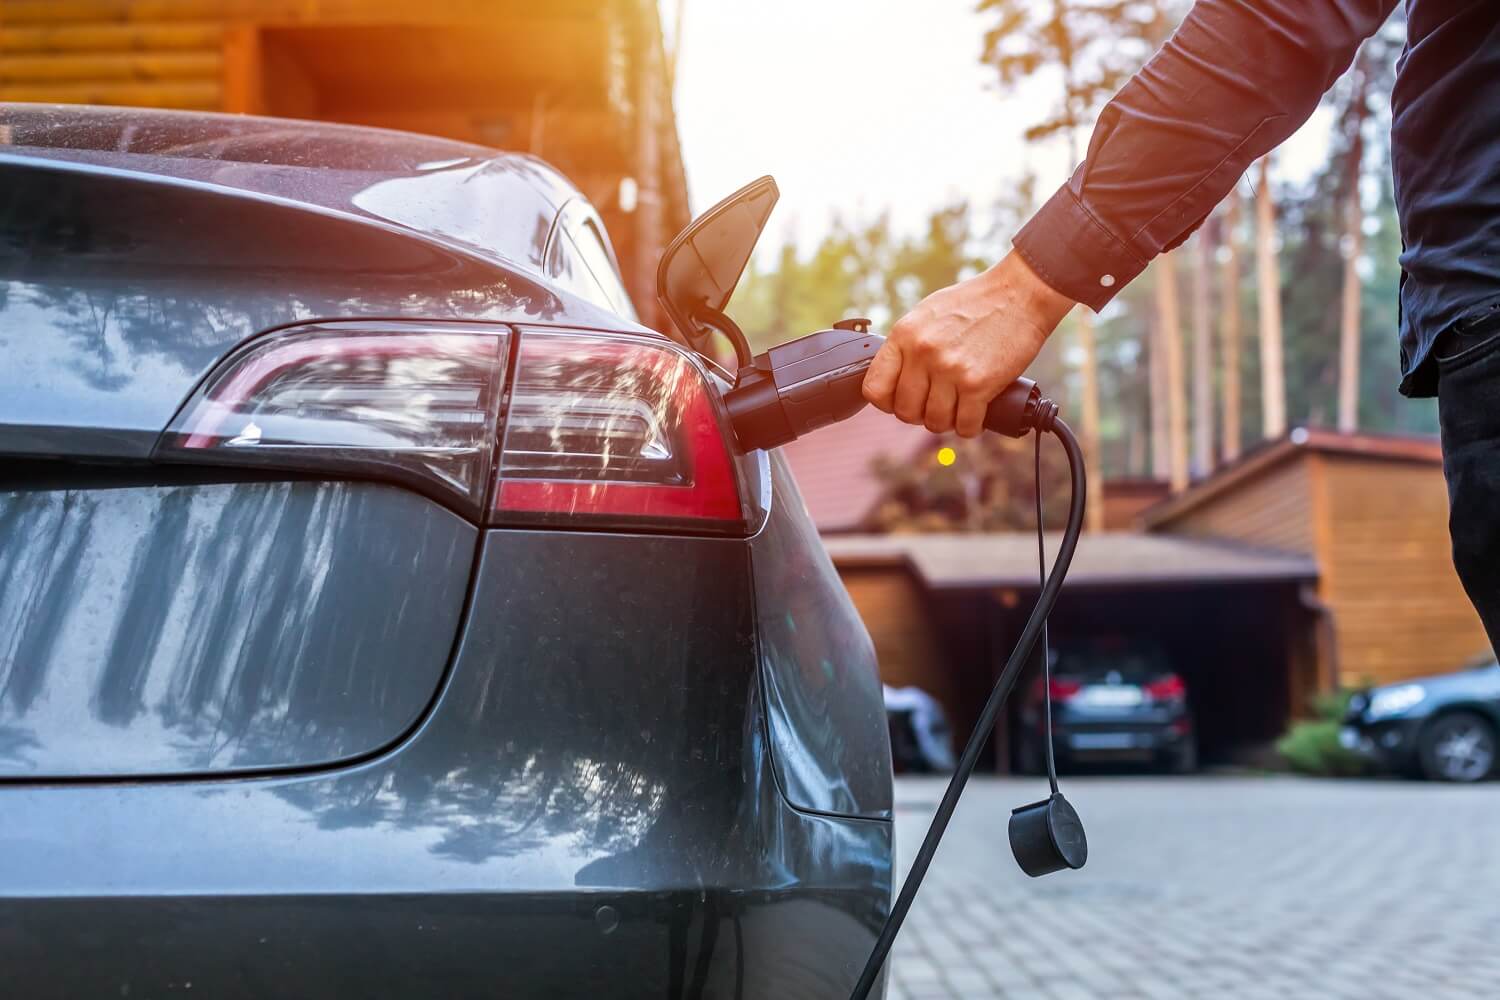 Our Top Tips for First-Time Electric Vehicle Owners